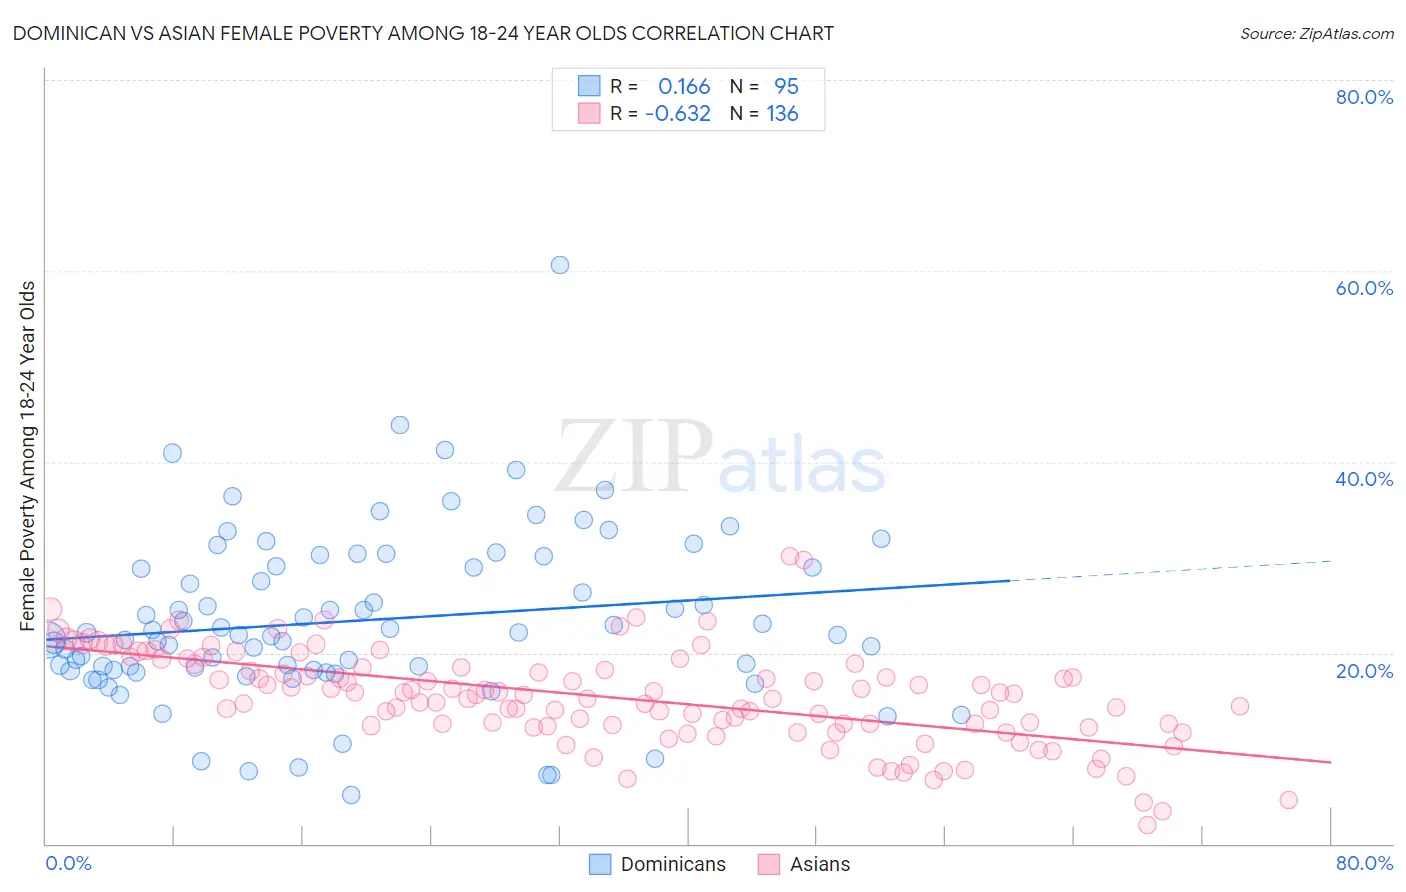 Dominican vs Asian Female Poverty Among 18-24 Year Olds